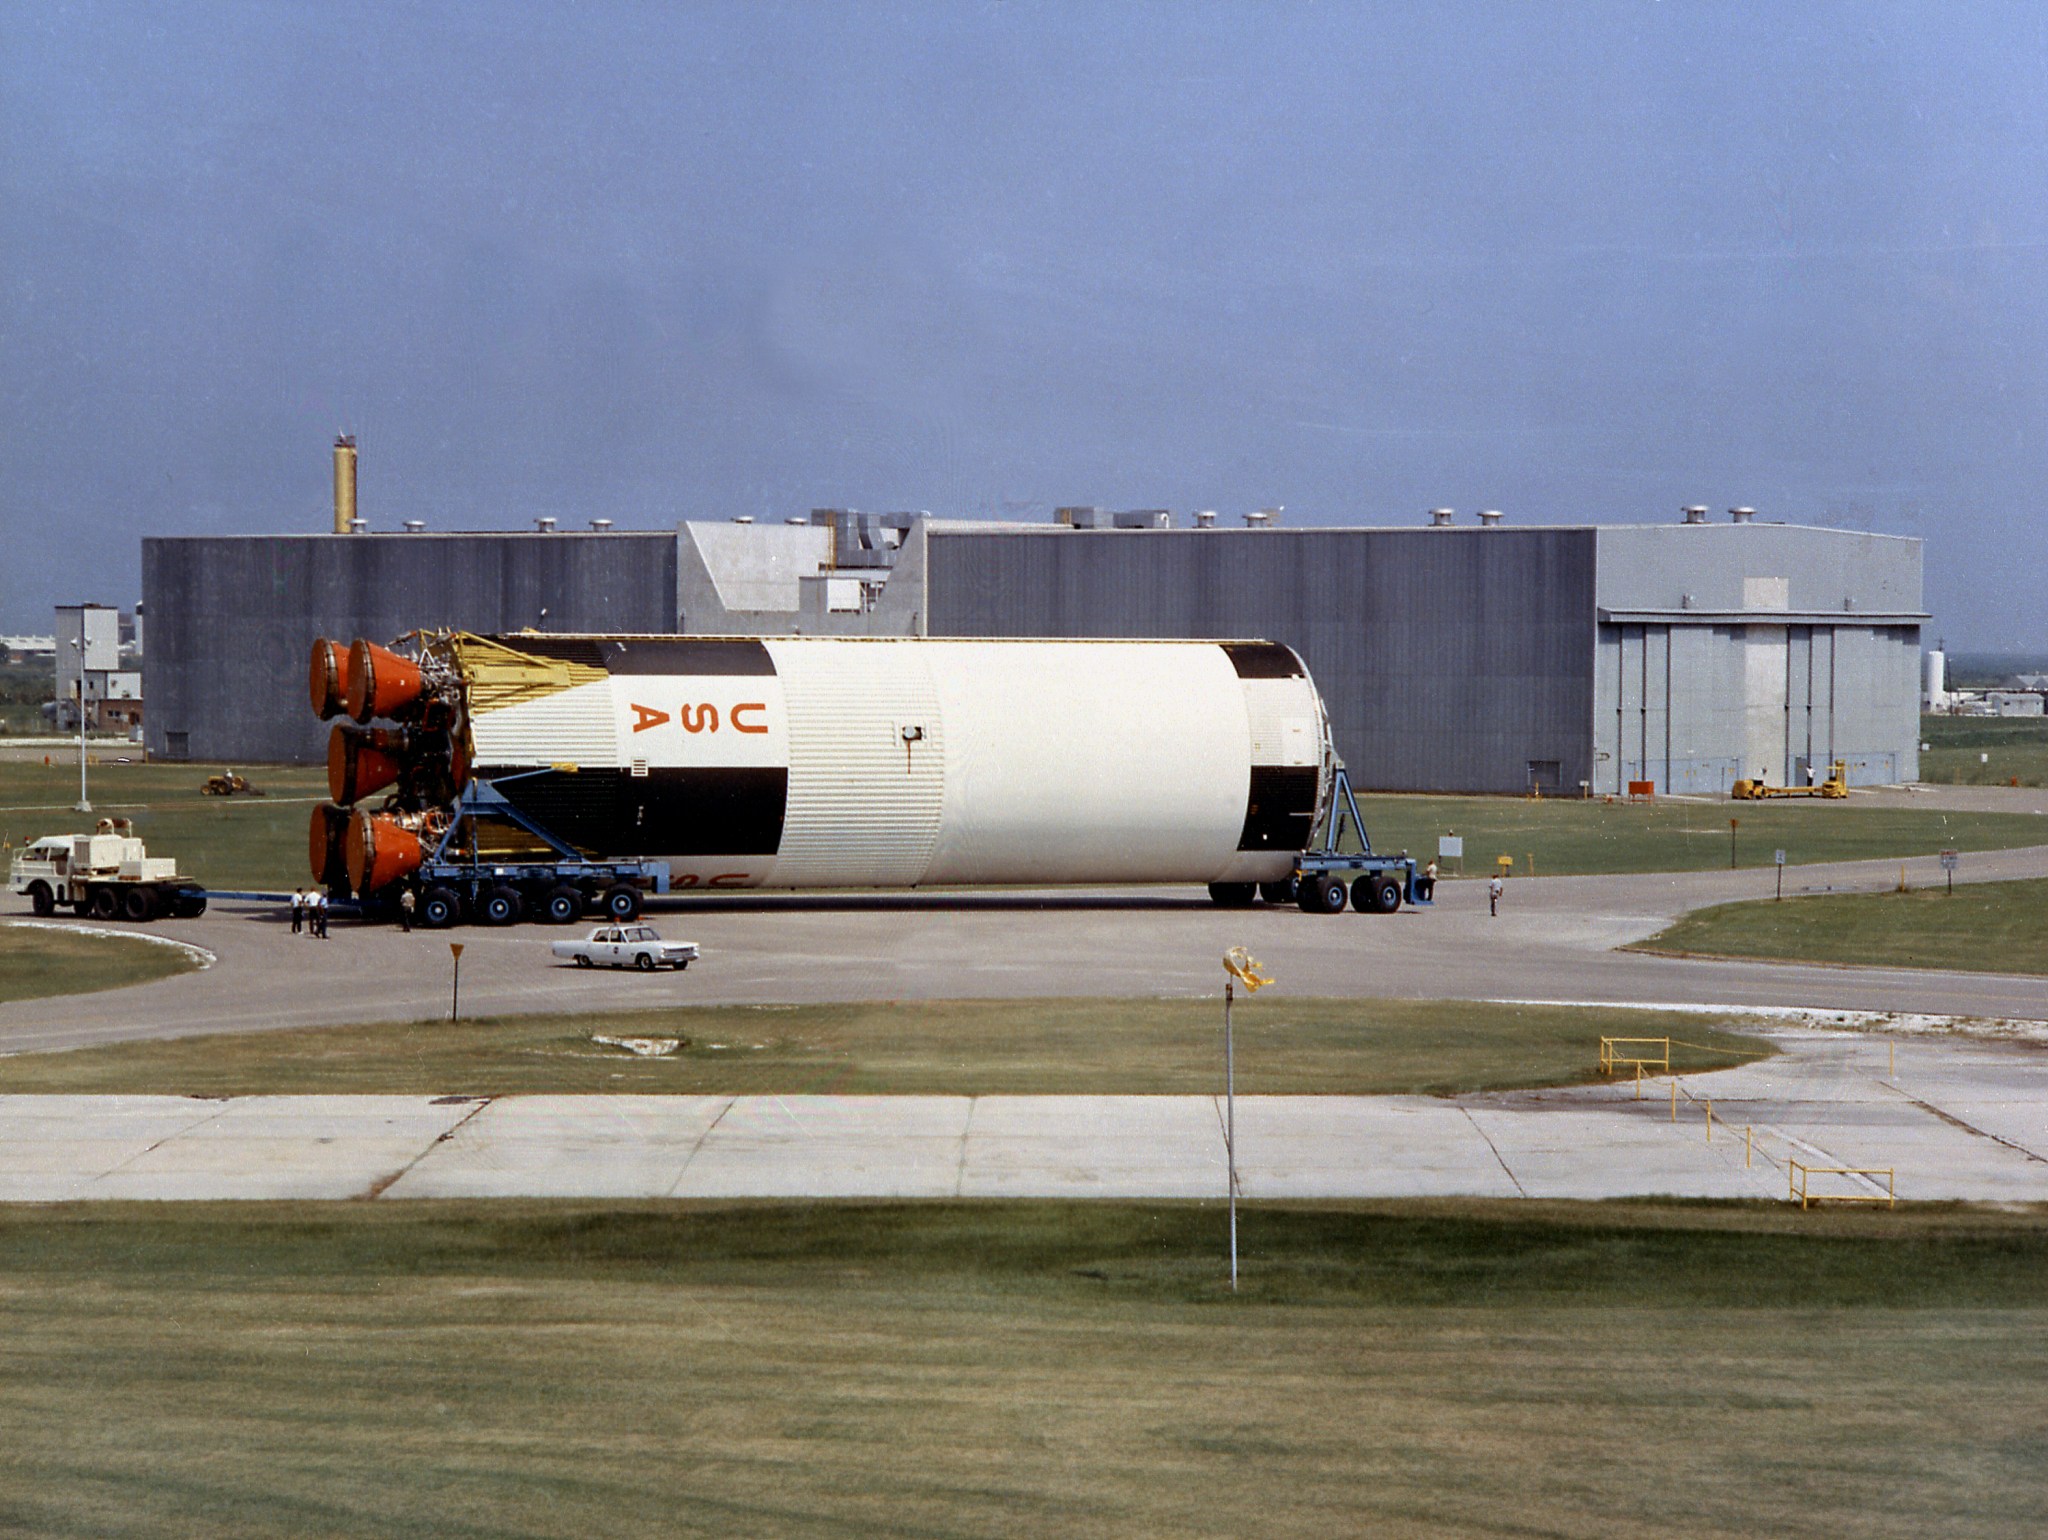 A completed S-IC flight stage is transferred in the summer of 1968 from the vehicle assembly building to the stage test building at the Michoud Assembly Facility.